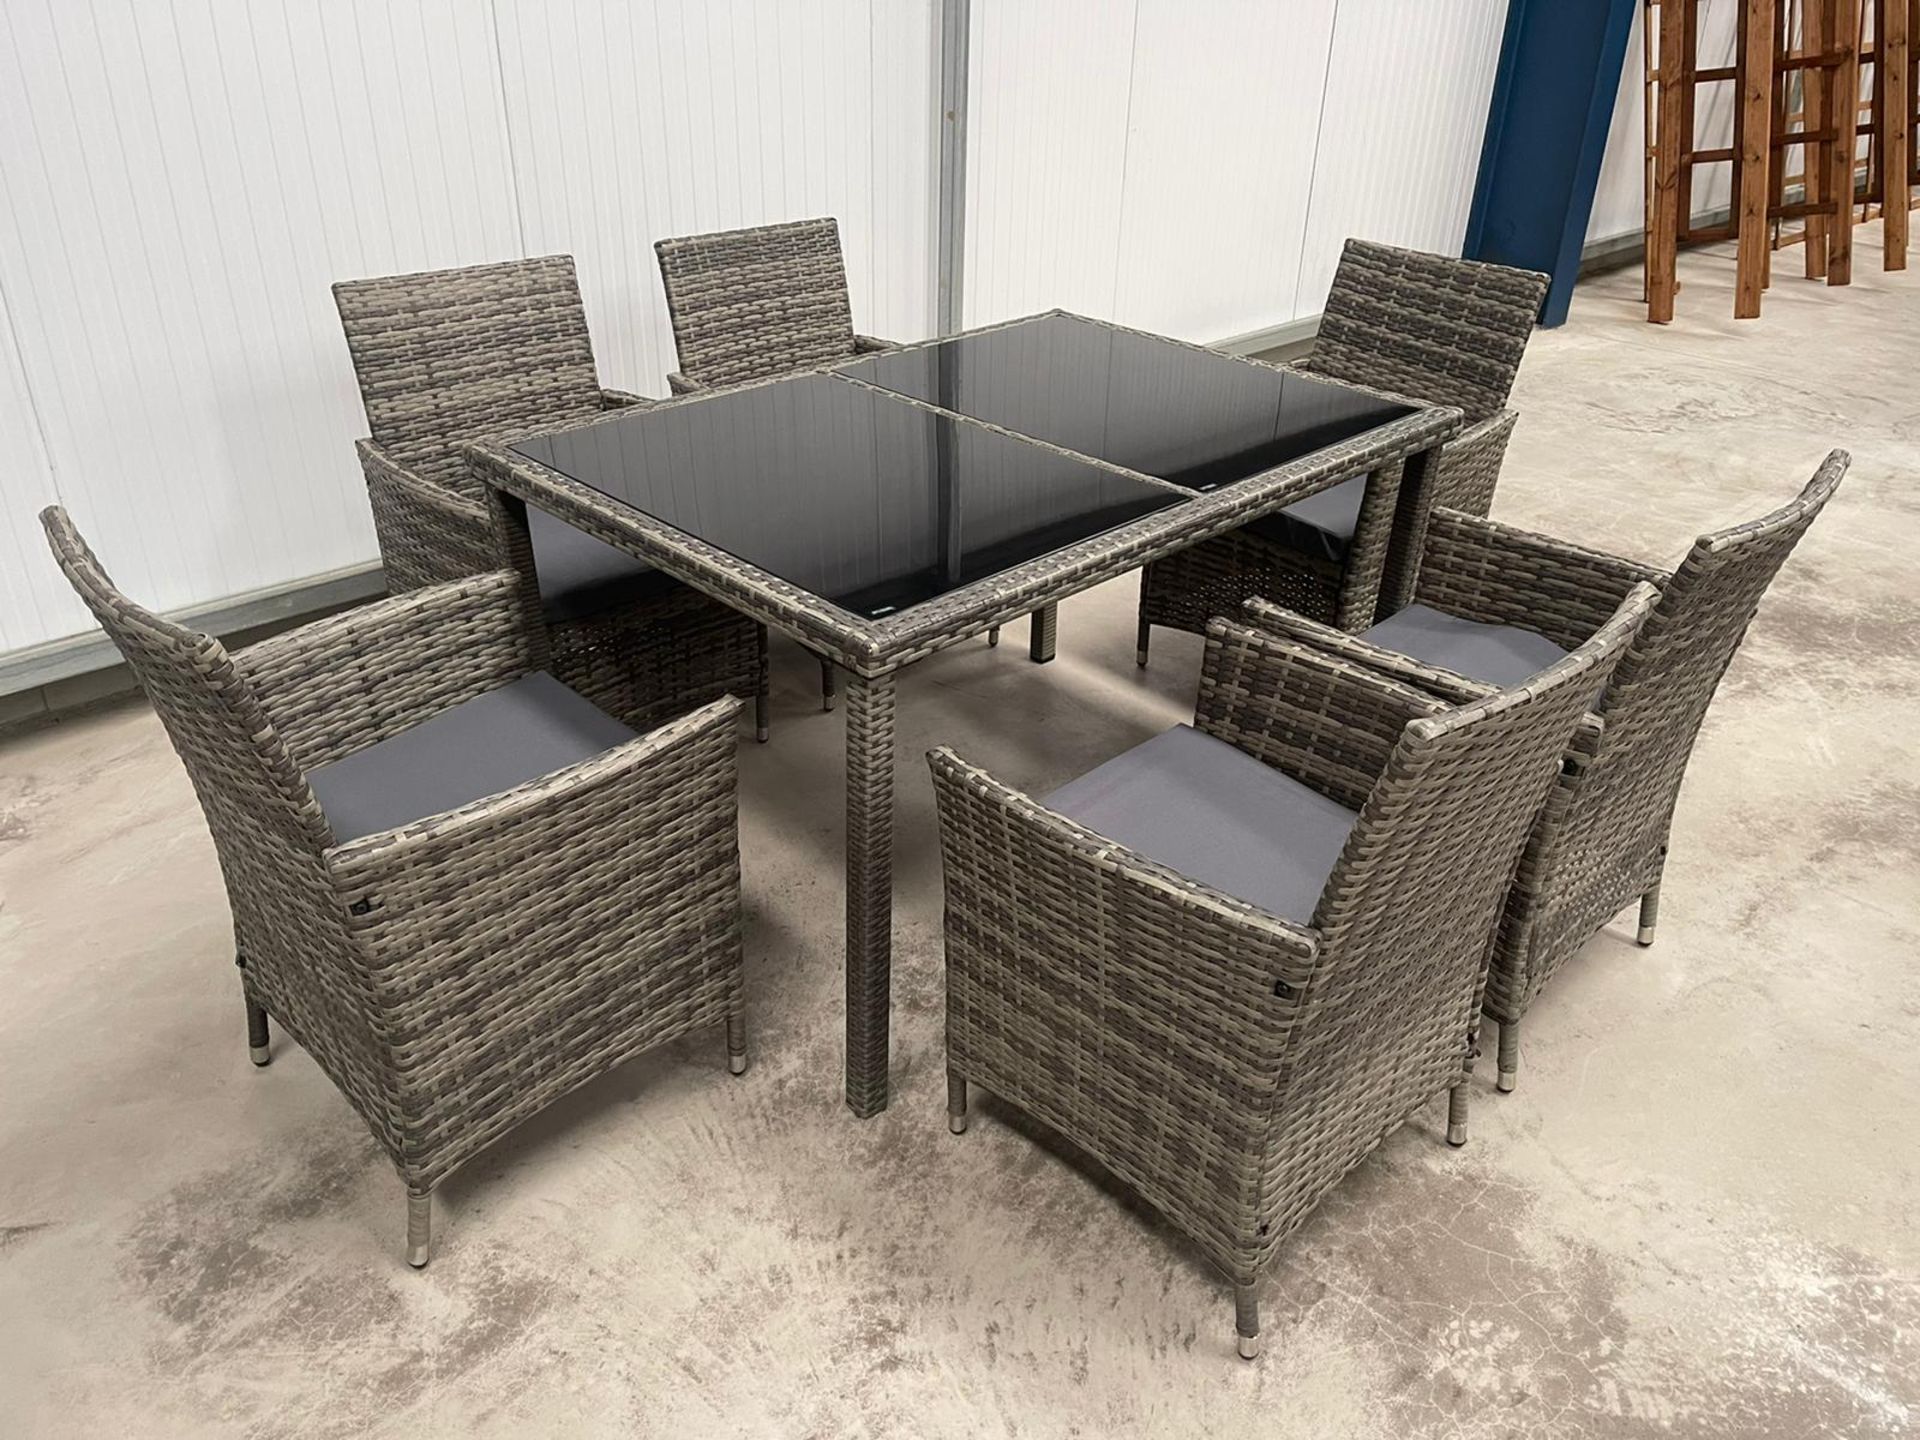 RRP £999 - NEW GREY SIX SEAT DINING SET WITH SIX CHAIRS - LUXURY BLACK GLASS TOPPED DINING TABLE